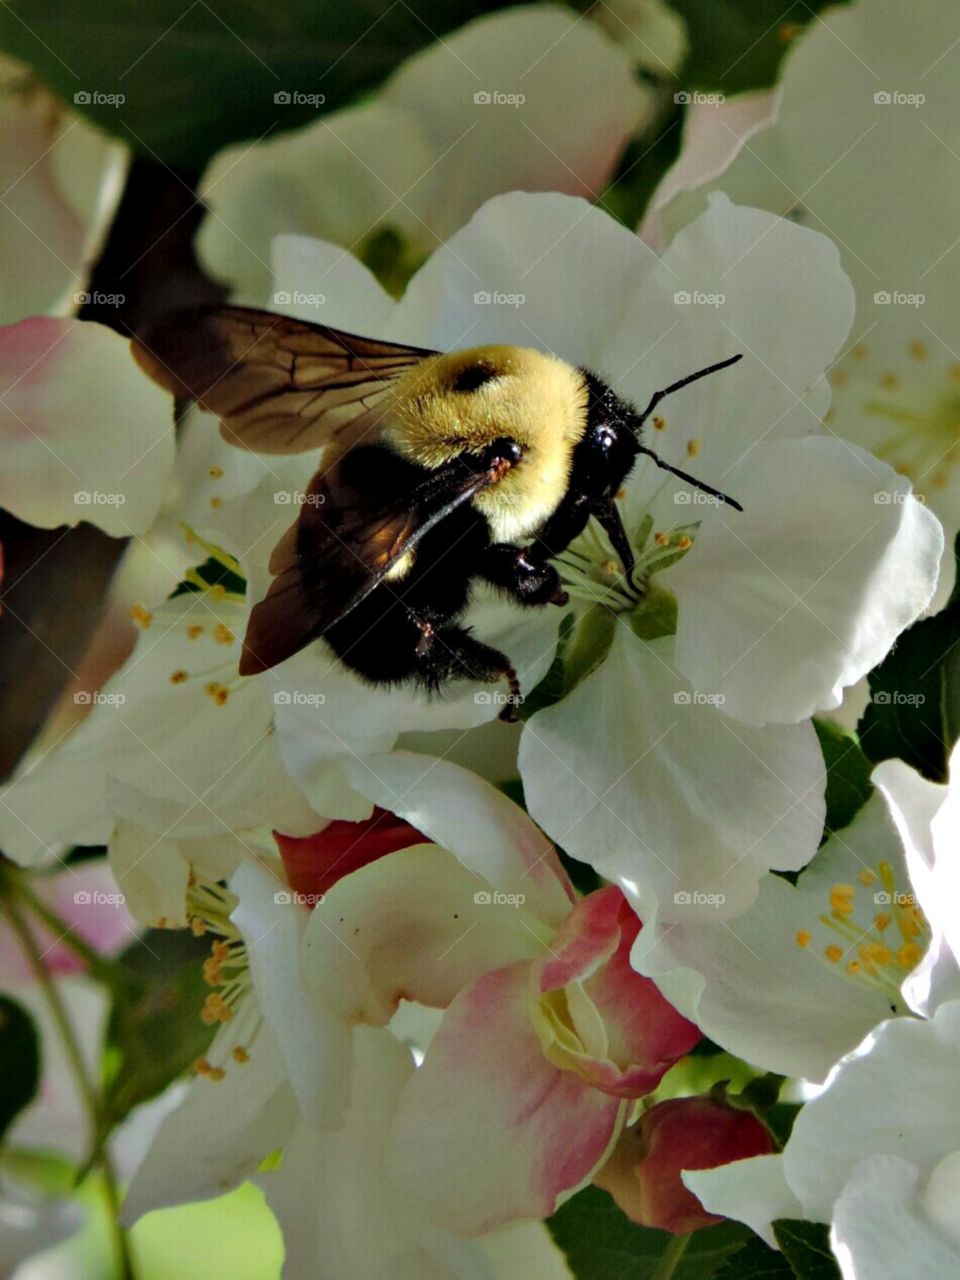 Busy Bee. A bee joined my flower session